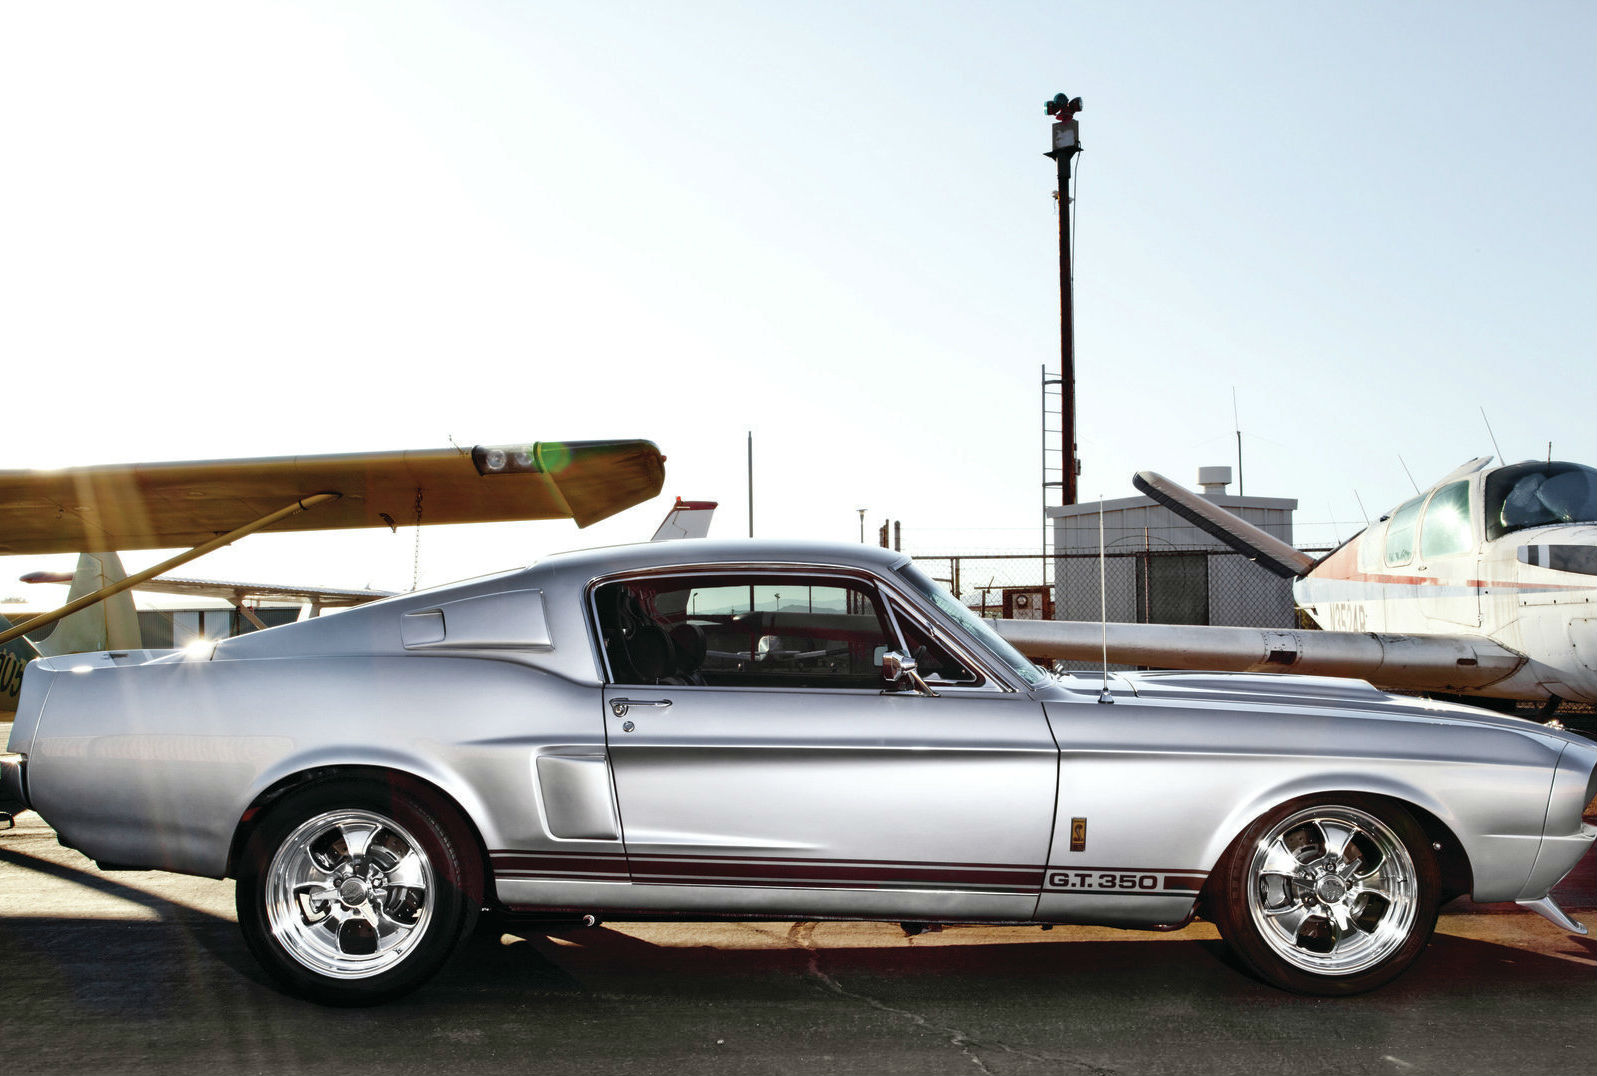 HQ 1968 Ford Mustang Wallpapers | File 219.85Kb